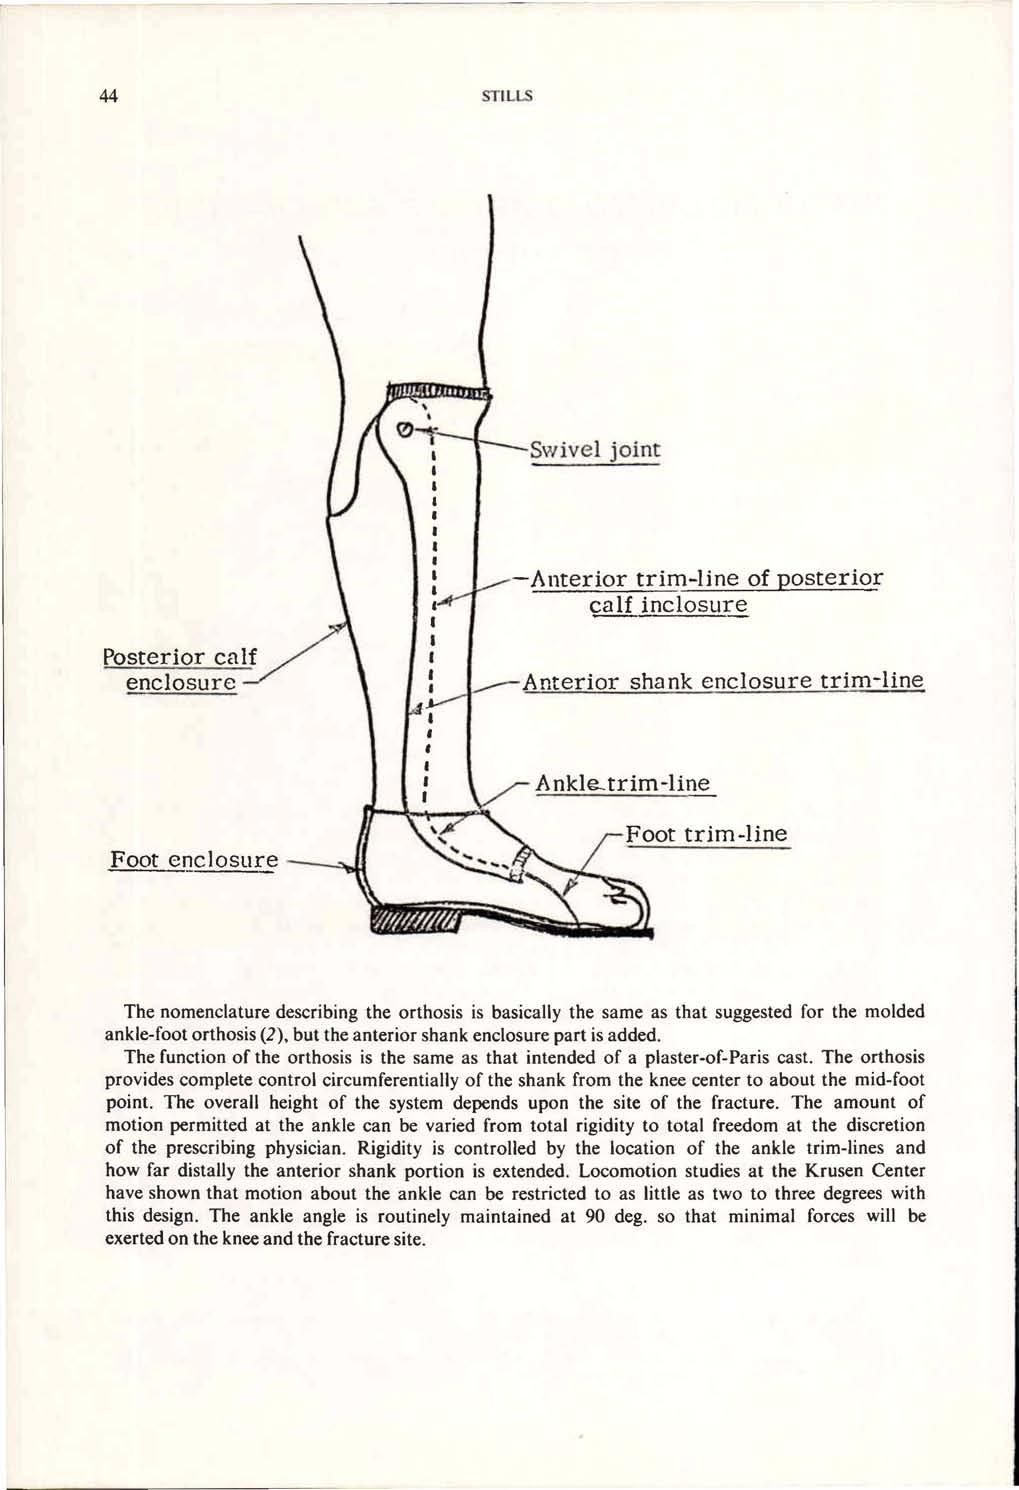 The nomenclature describing the orthosis is basically the same as that suggested for the molded ankle-foot orthosis (2), but the anterior shank enclosure part is added.